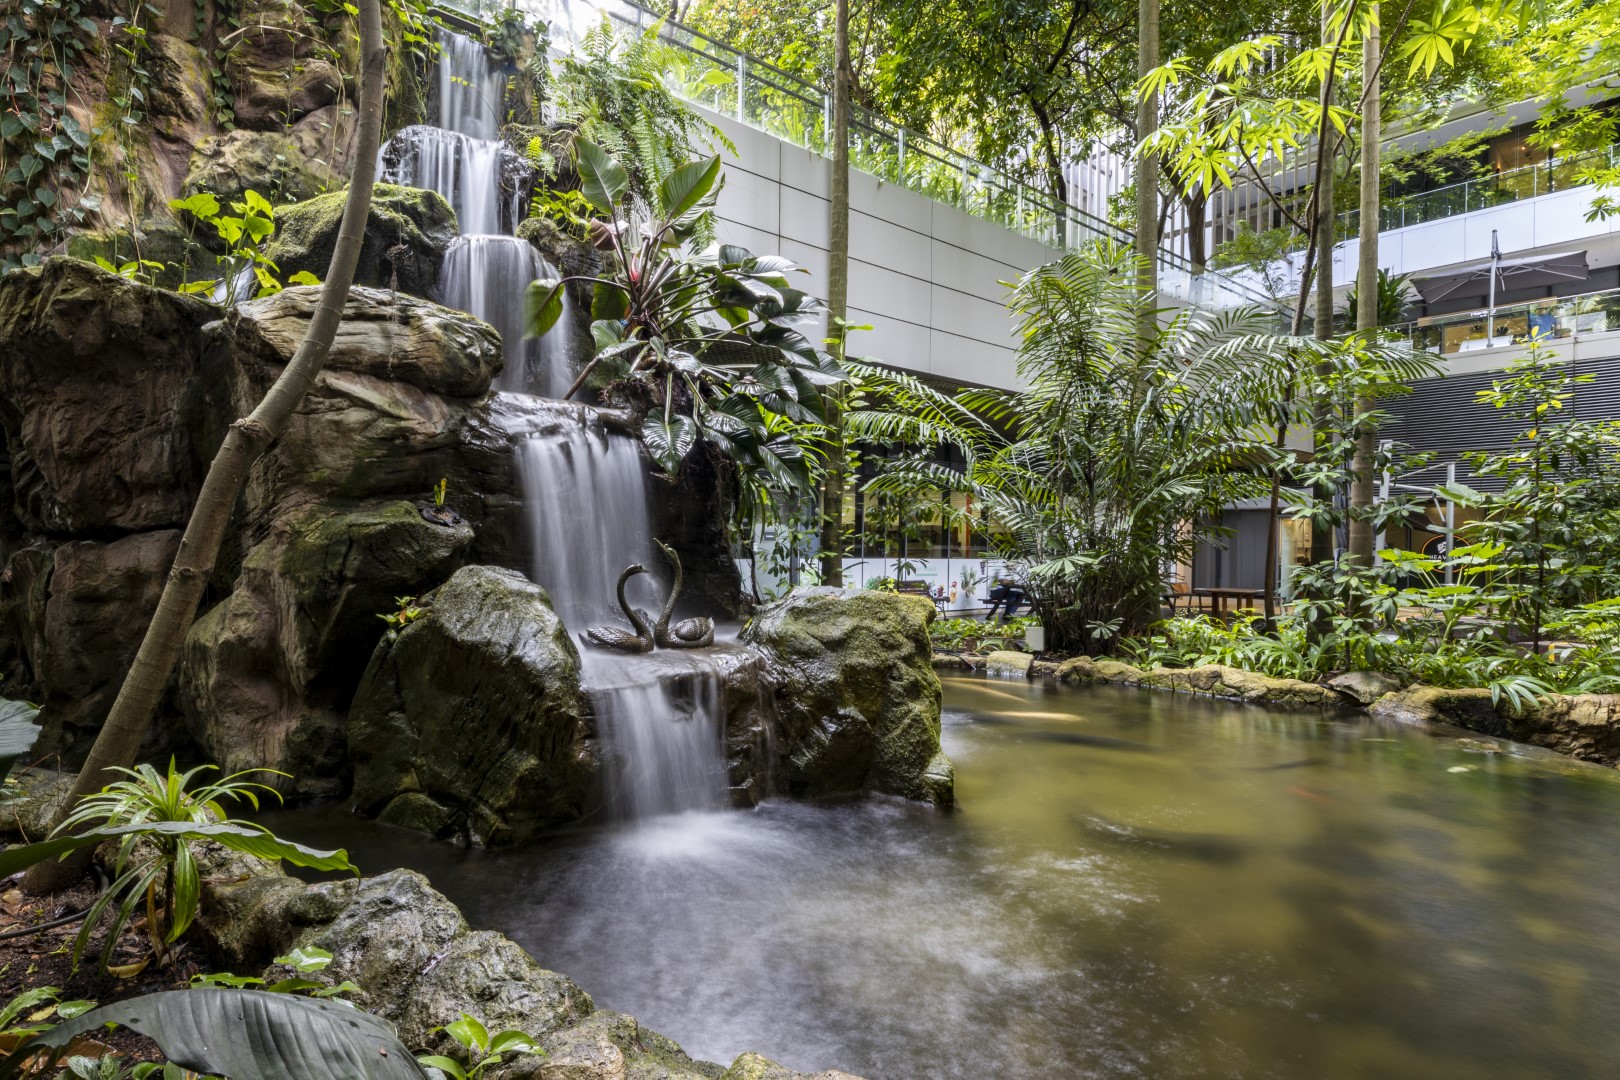 A central garden courtyard with water features has turned Khoo Teck Puat Hospital into a medical Shangri-La